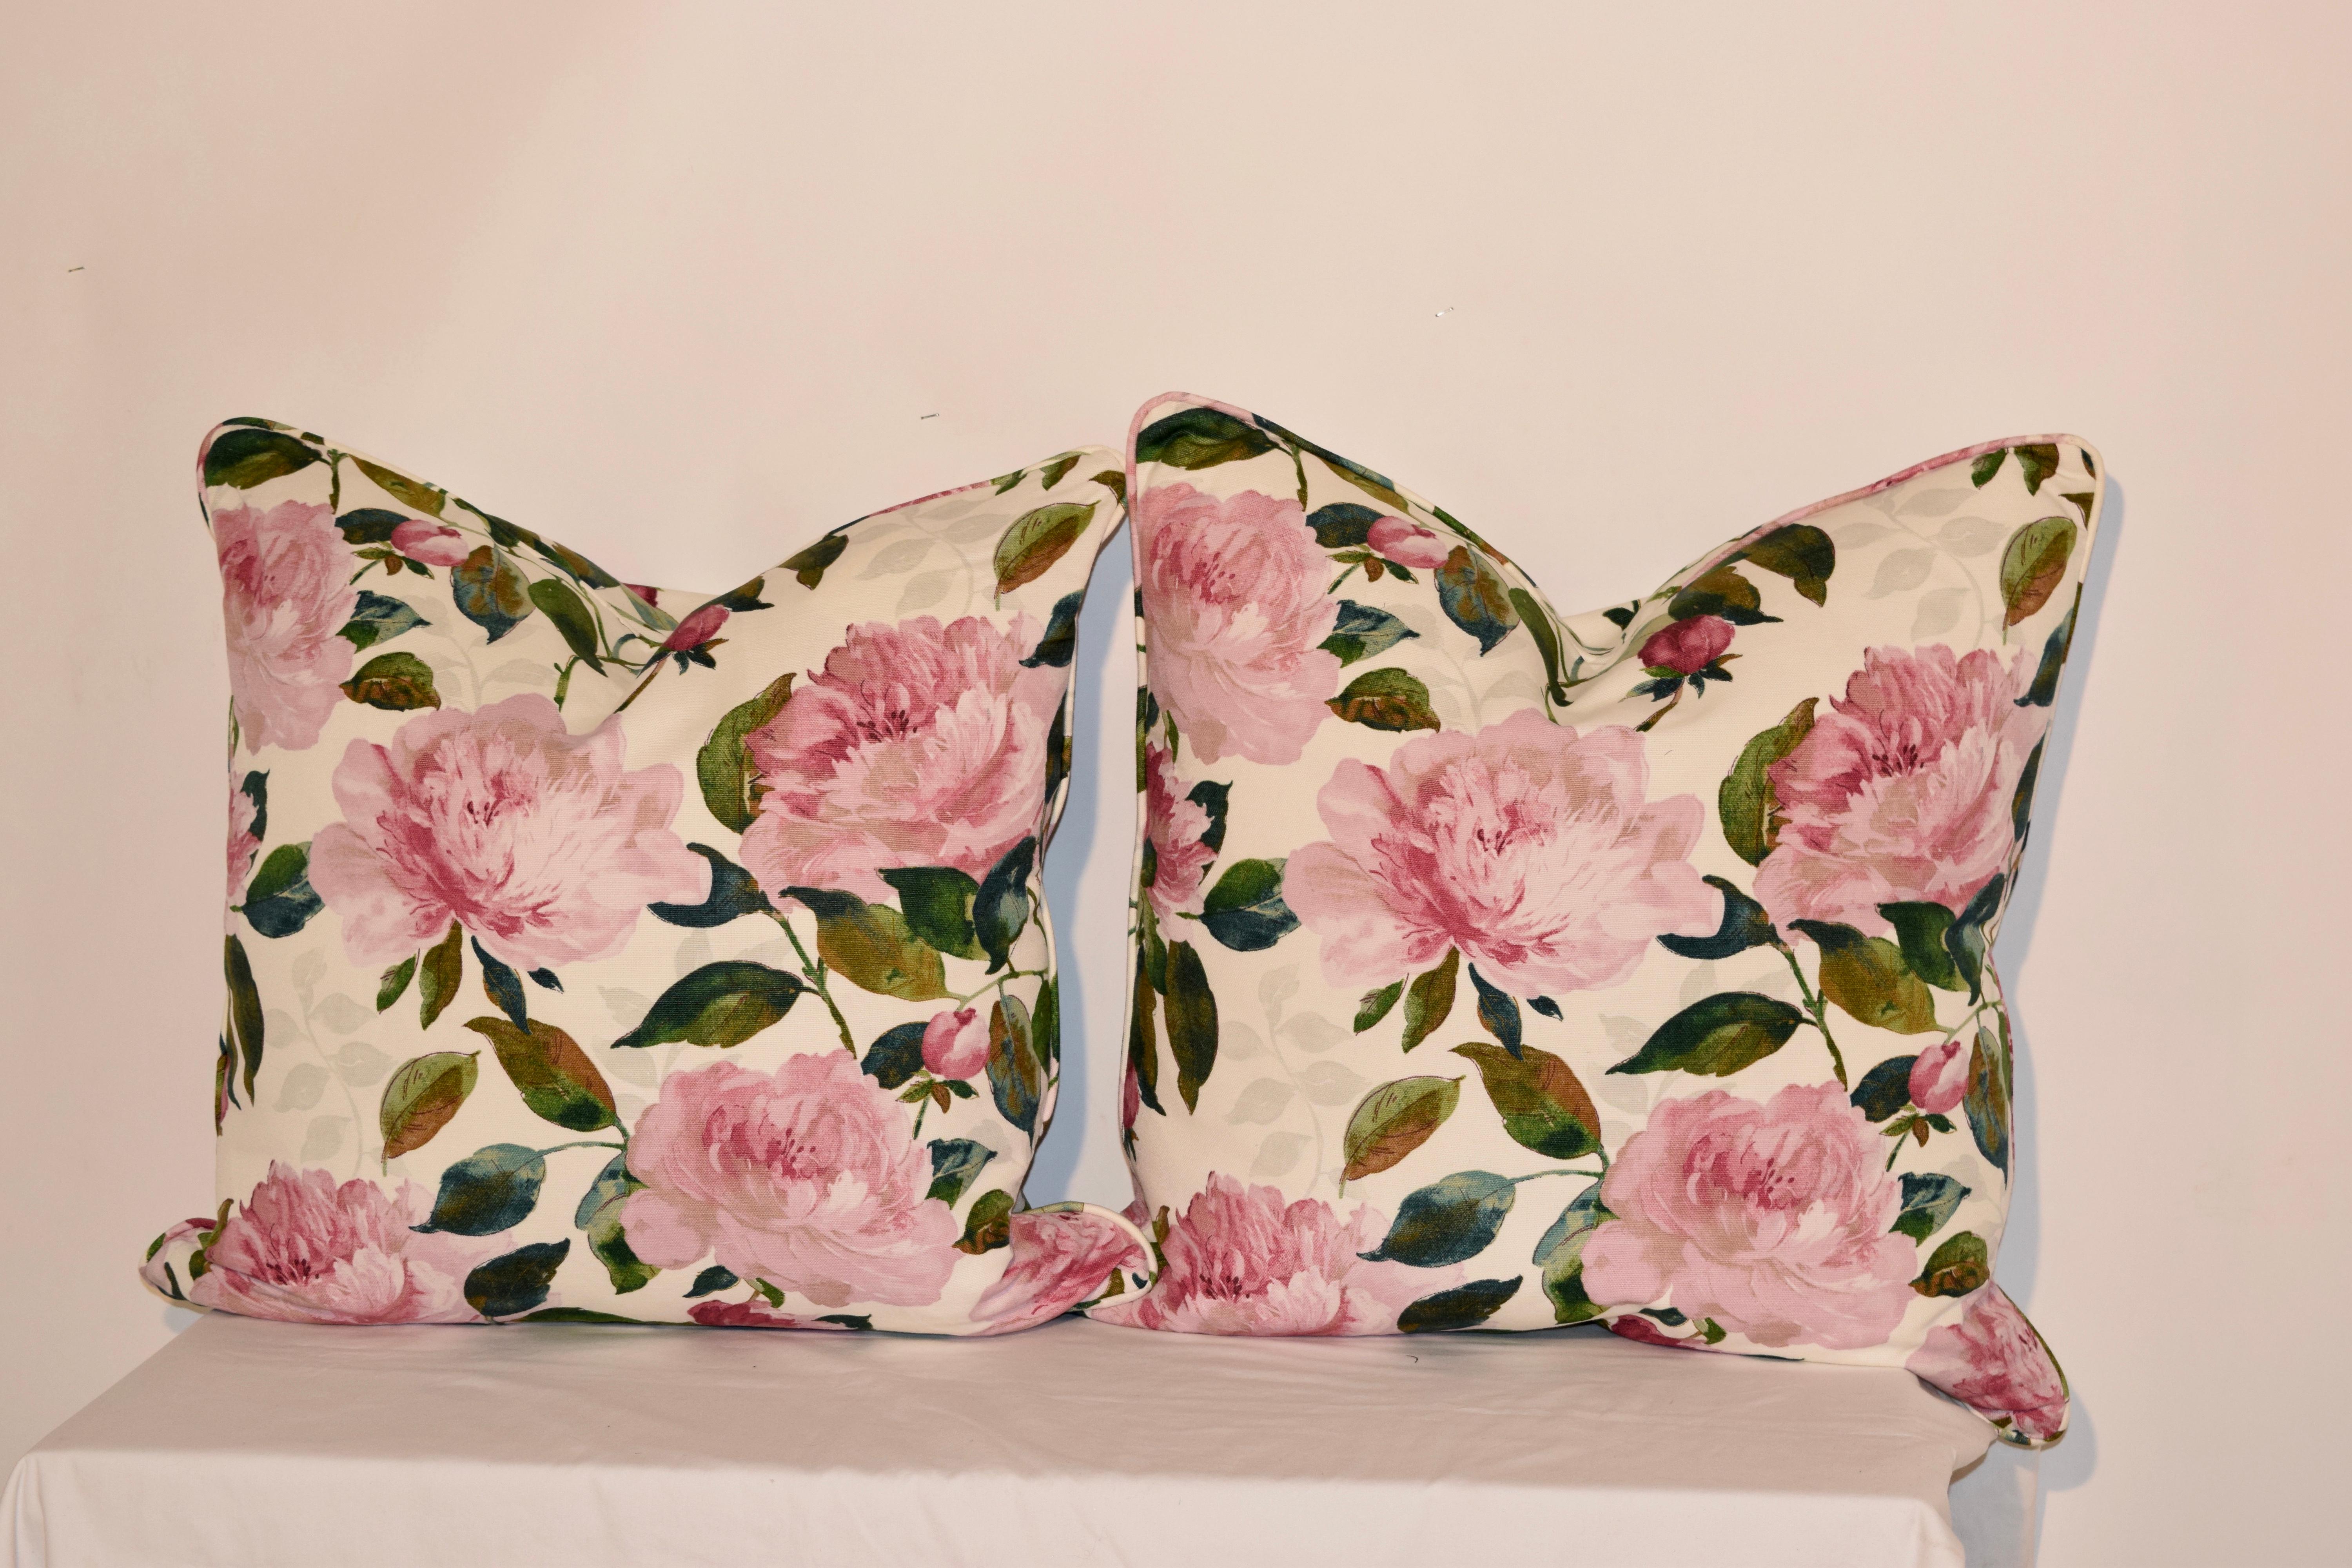 Handmade pillows from Bolsters. The pillows are made from printed cotton fabric and are embellished with matching welt made from the same fabric. The pillow covers have hidden zippers and the inserts are removable and are made from feathers.